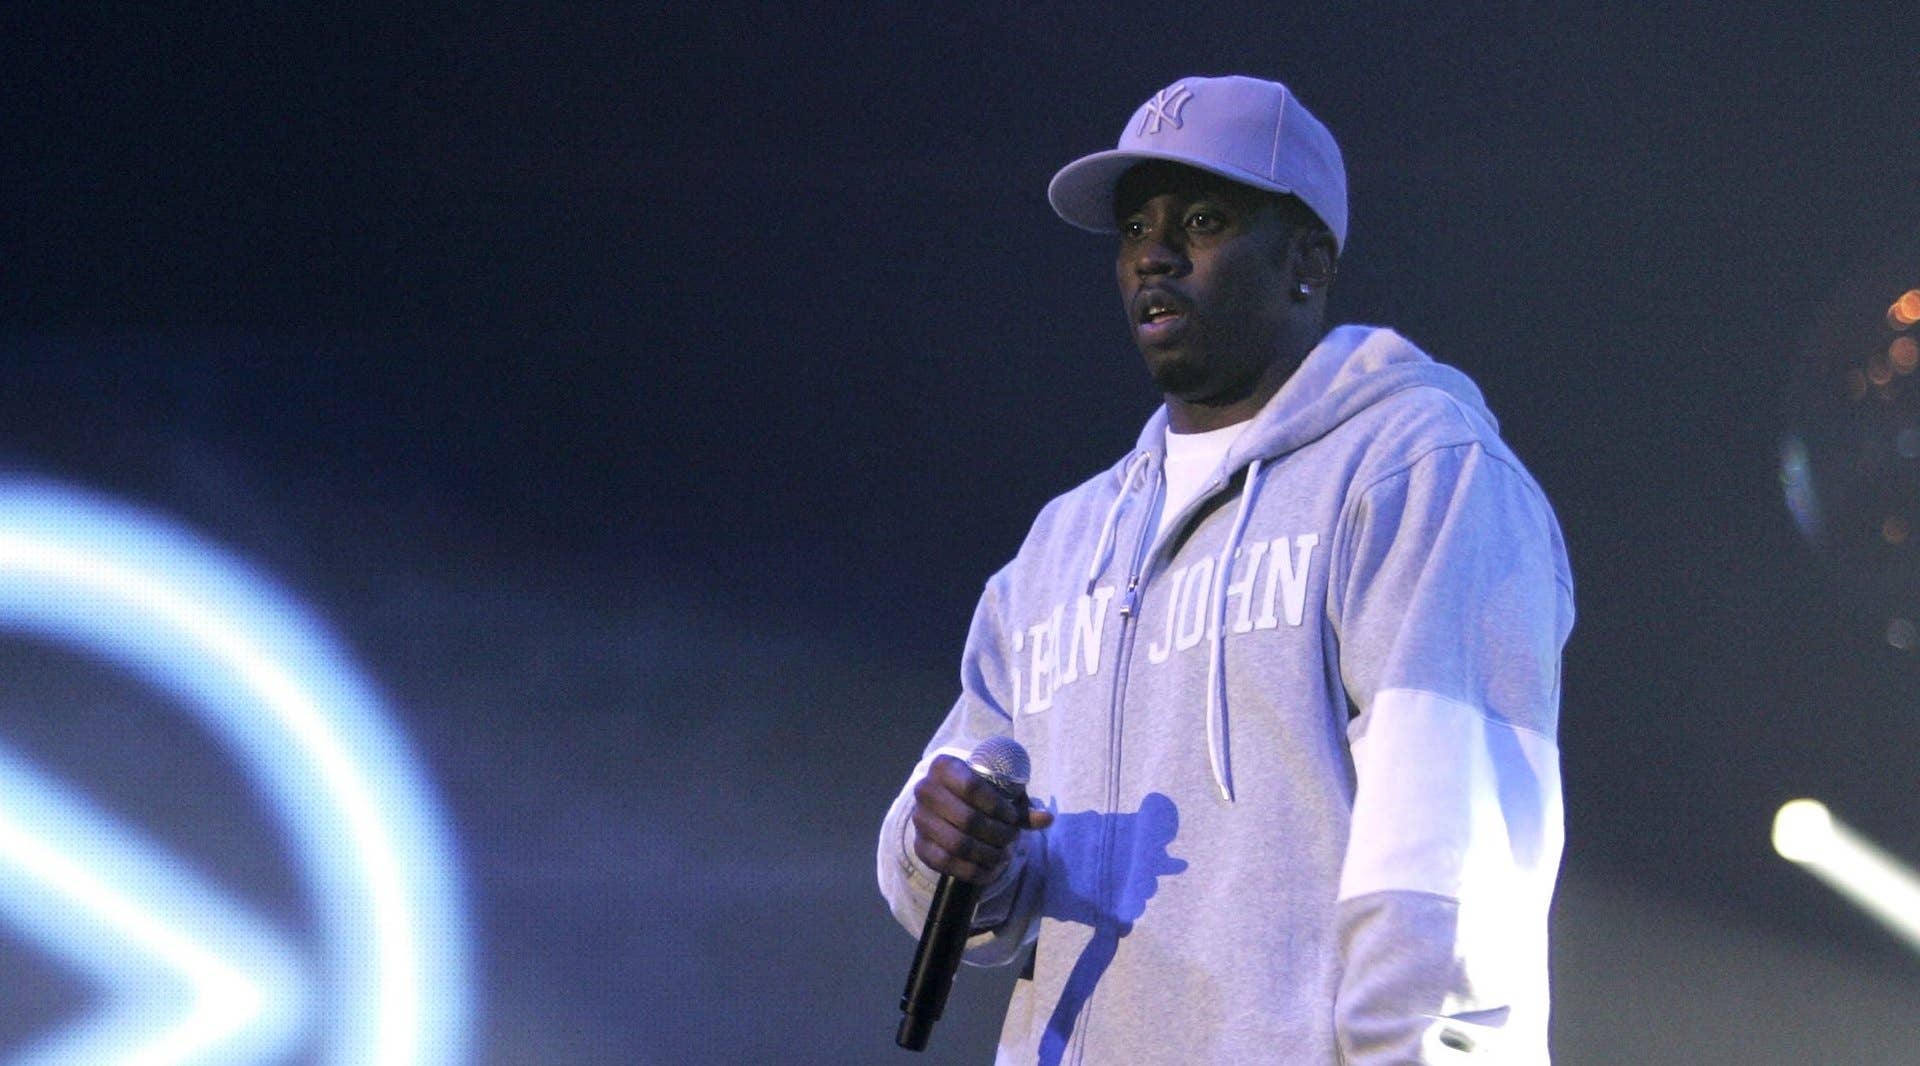 Sean Combs reclaims 'Puff Daddy' name